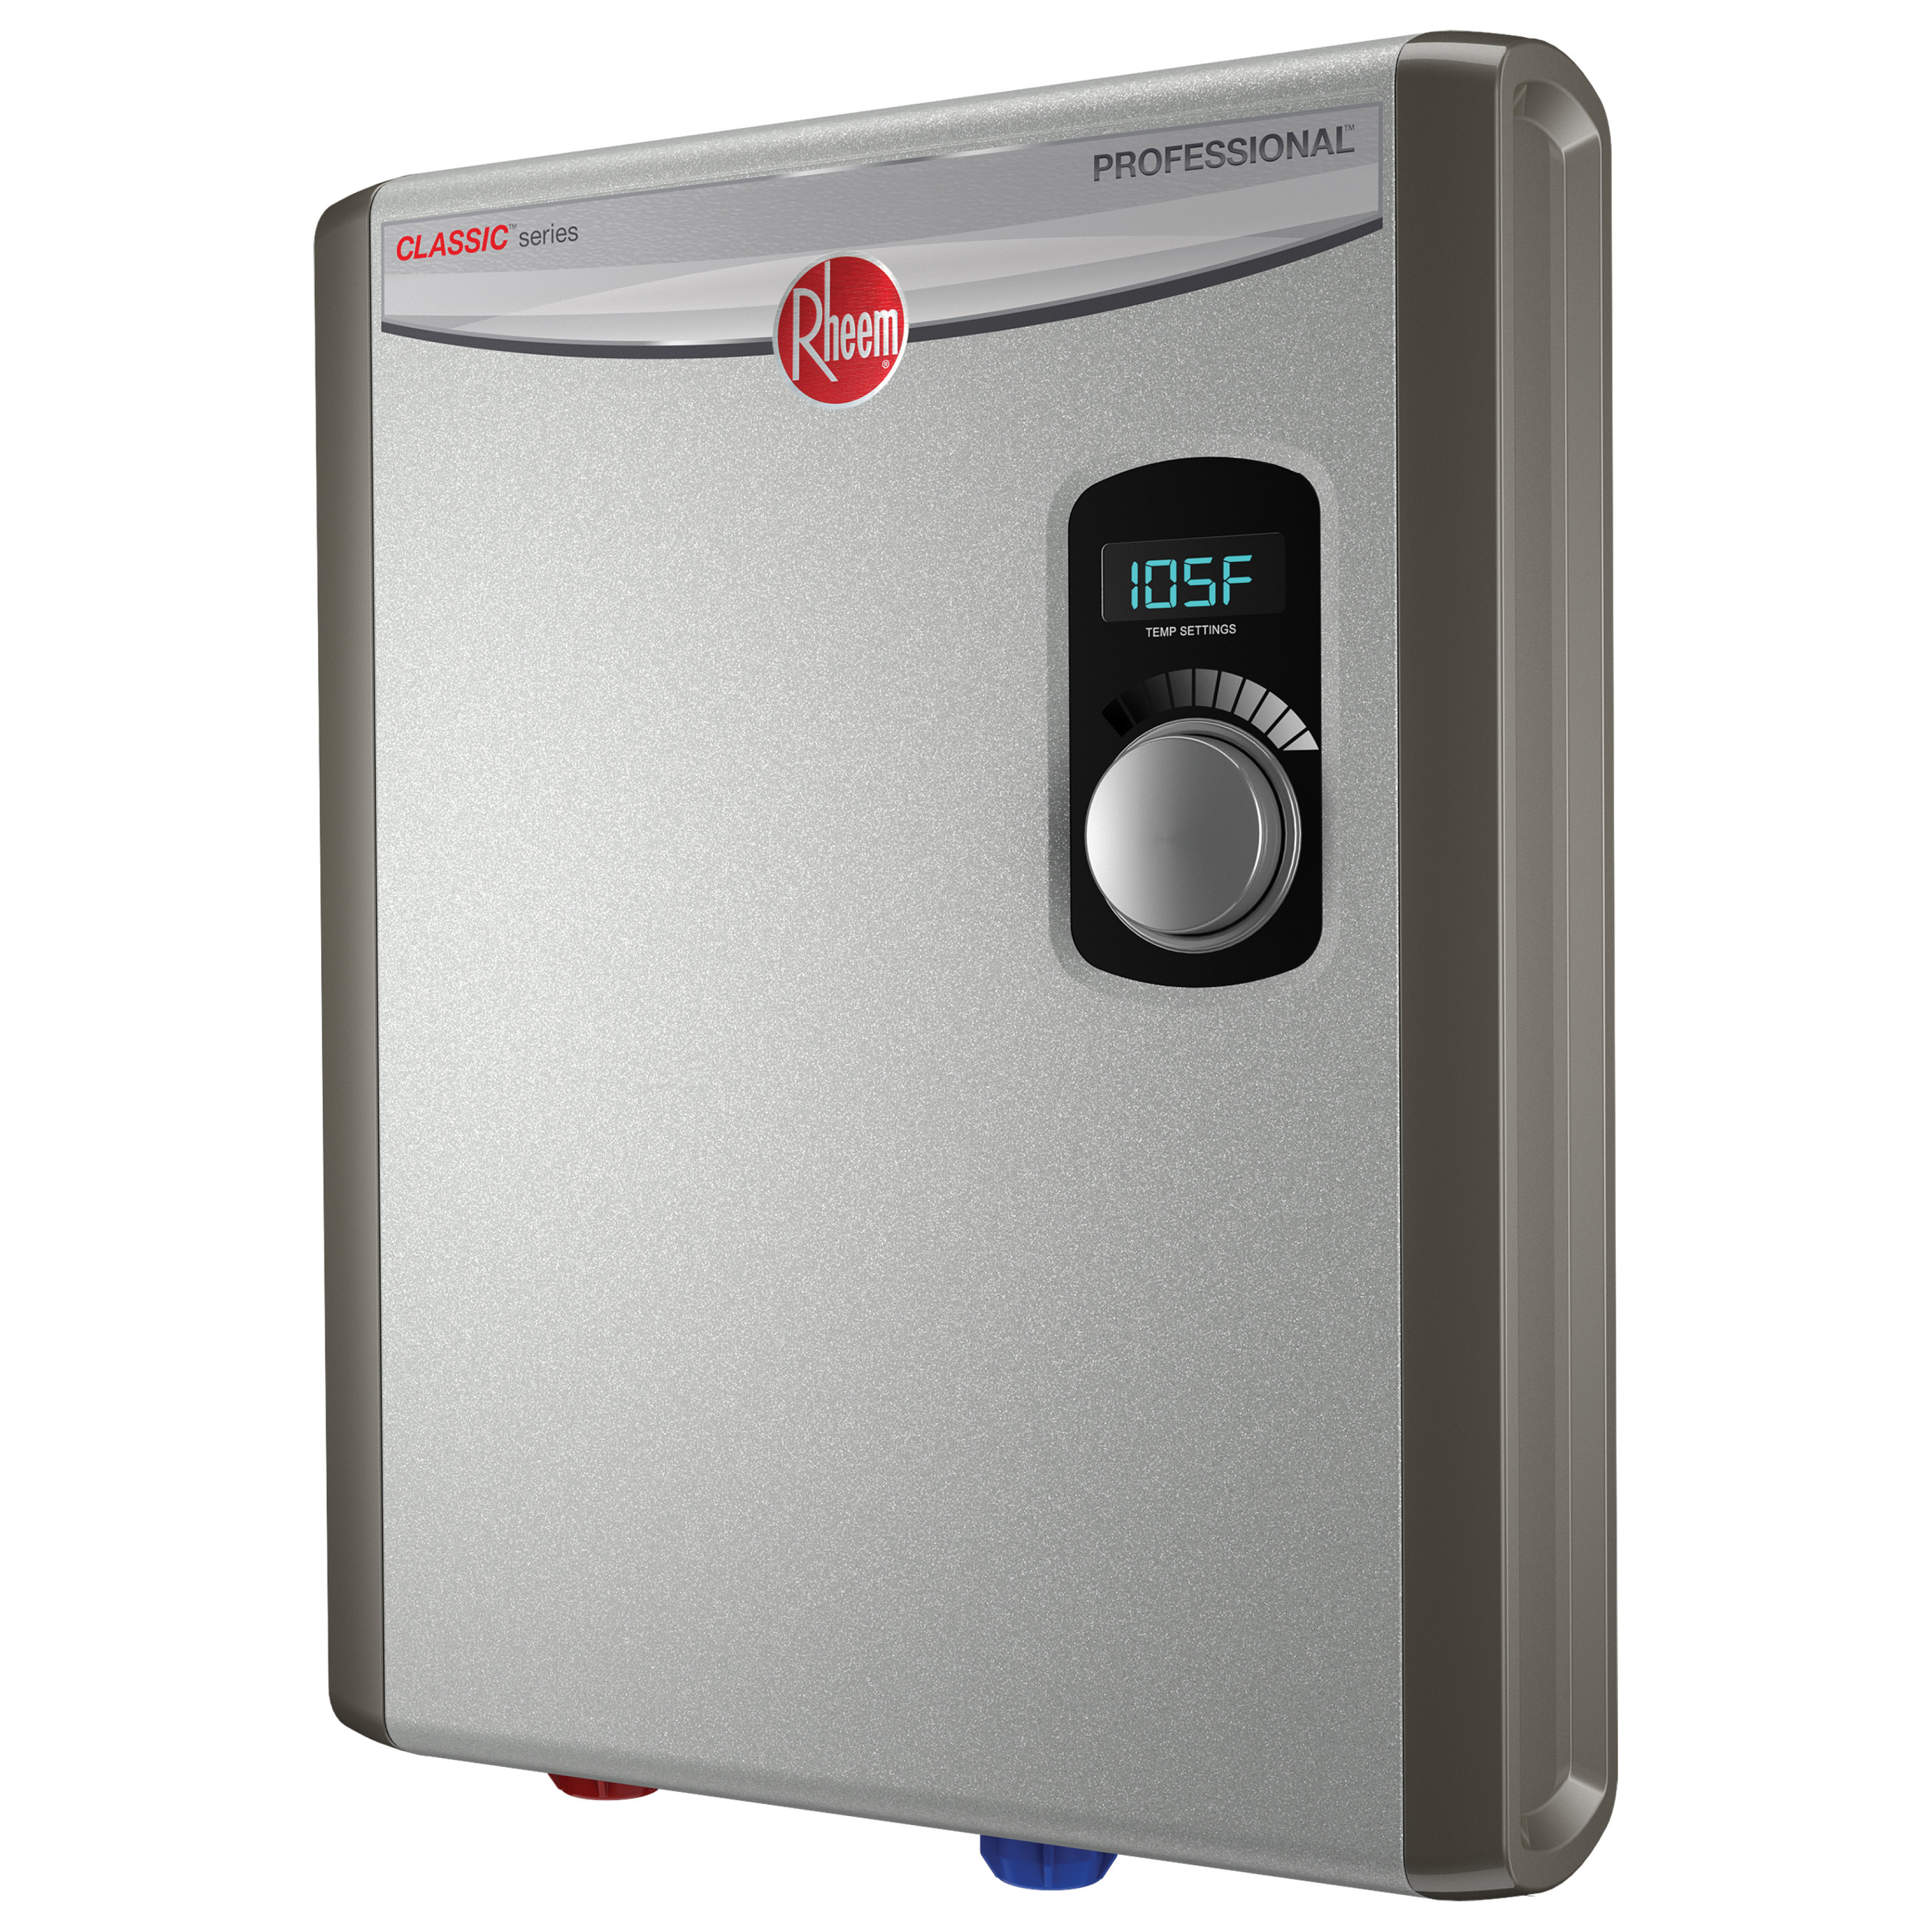 YINXIER 110 Volt 1.07 GPM Electric Tankless Water Heater & Reviews